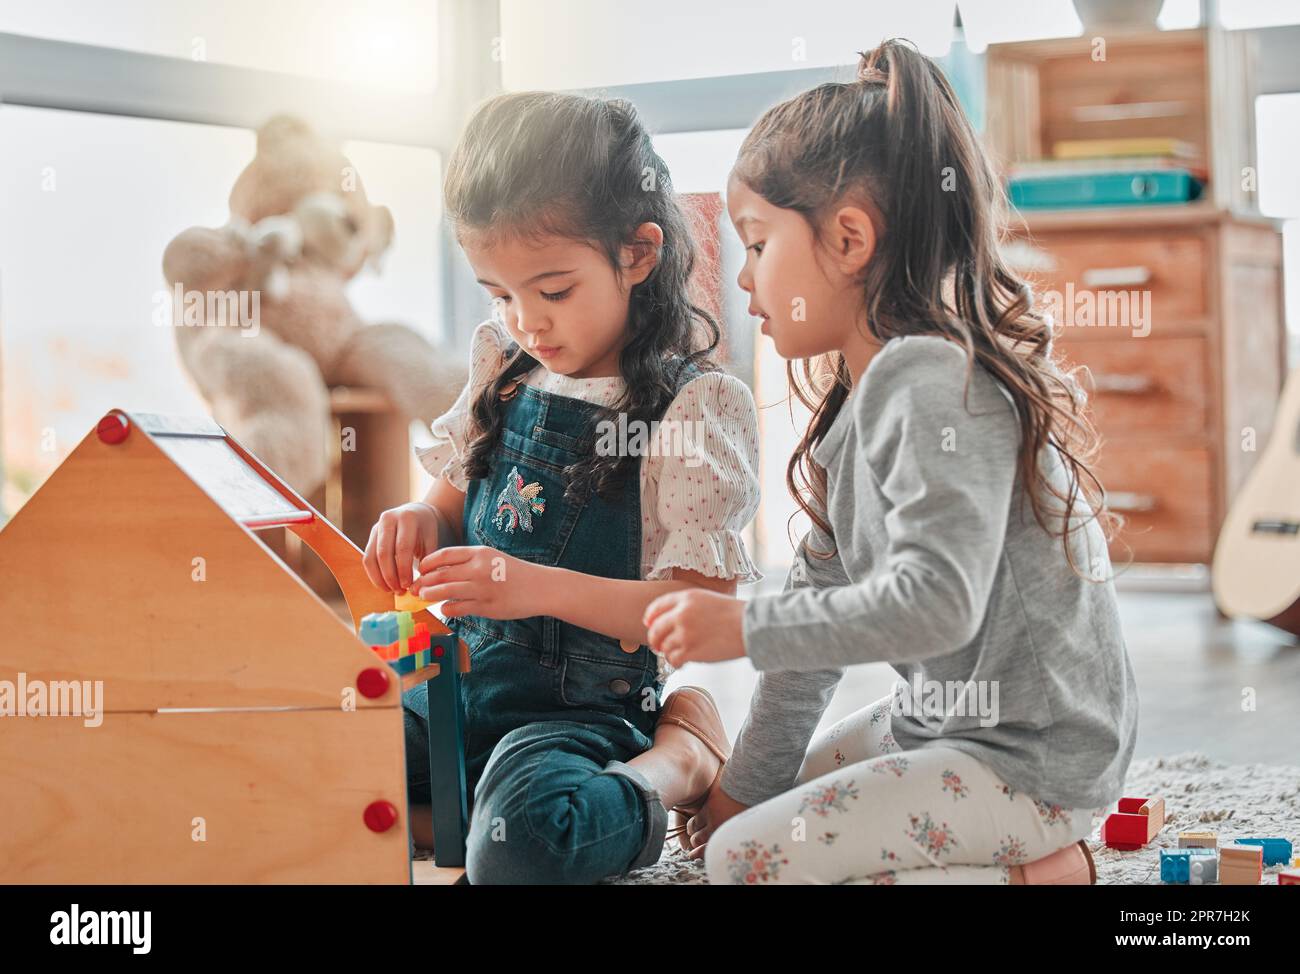 Were building a house for all our dolls to live in. two young girls playing with a dollhouse. Stock Photo